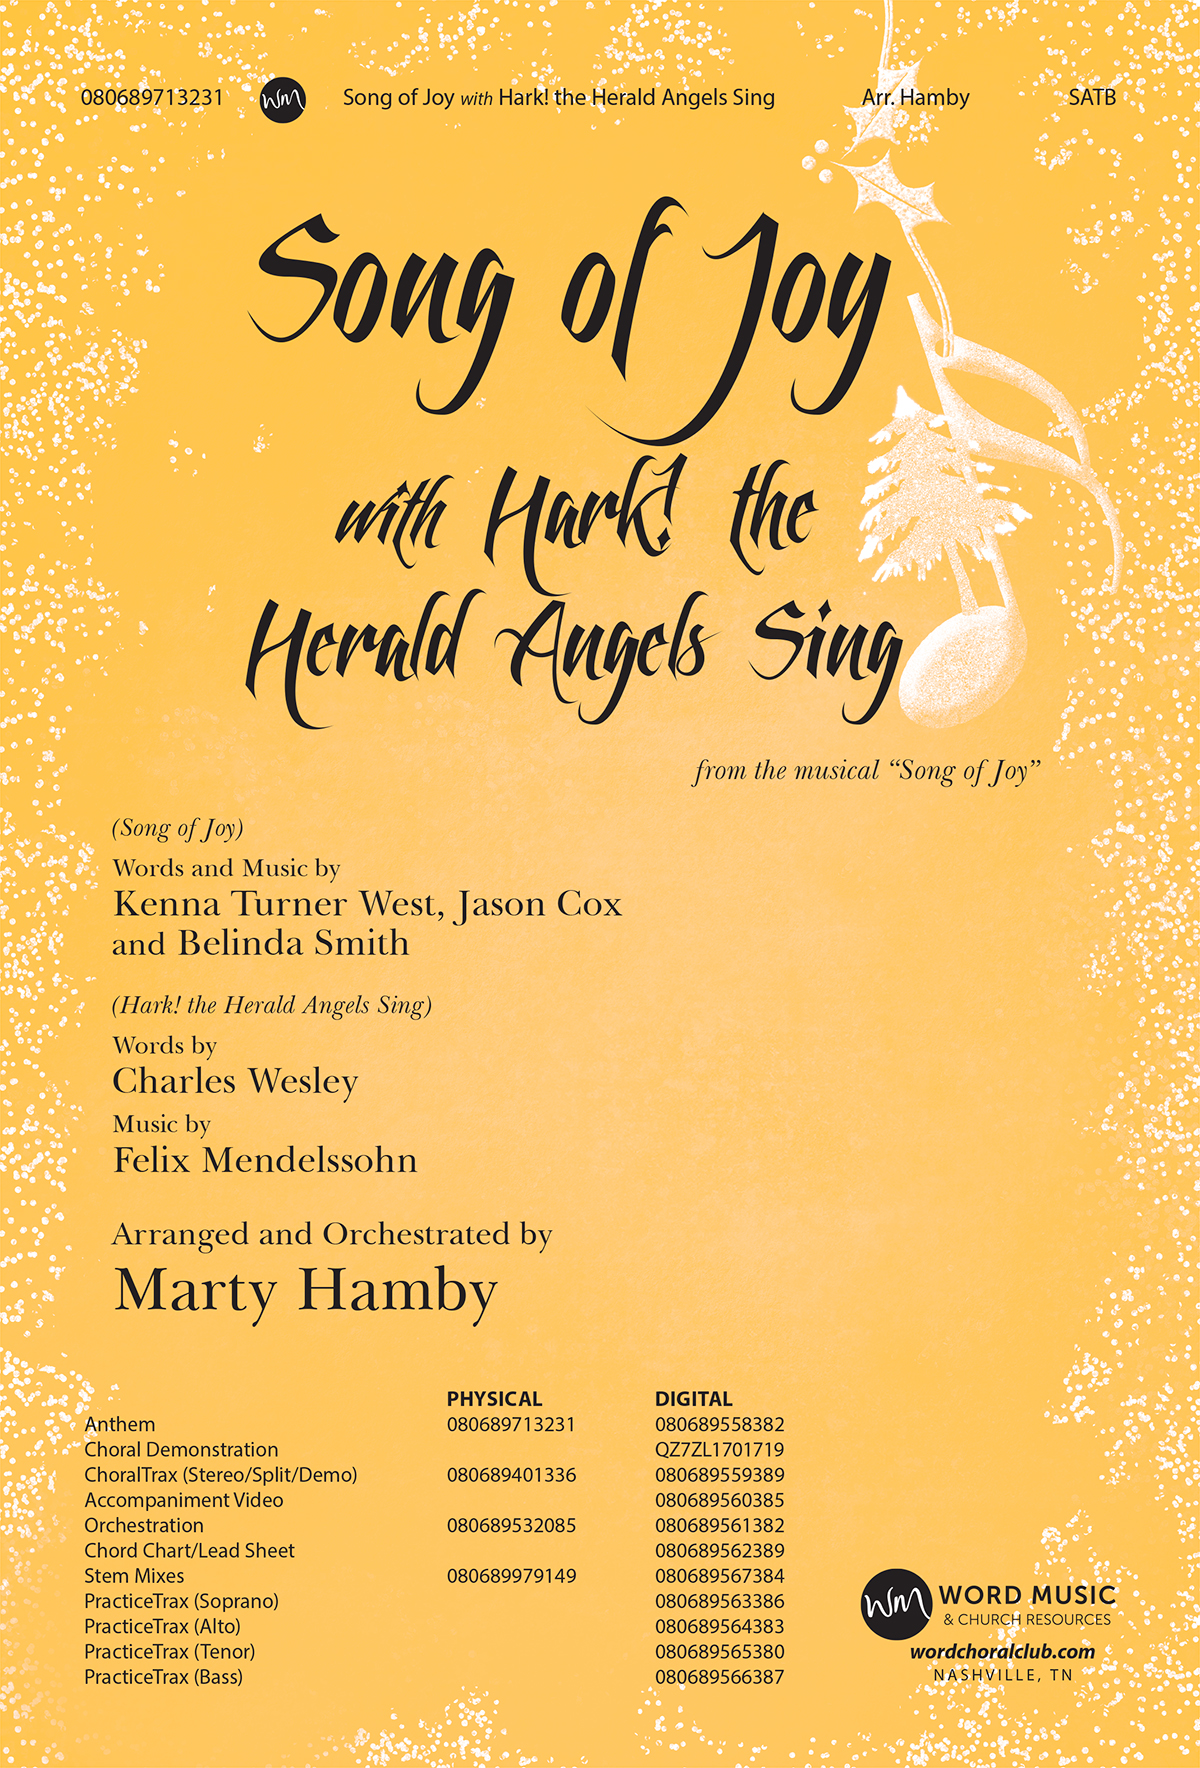 Song of Joy with Hark! the Herald Angels Sing